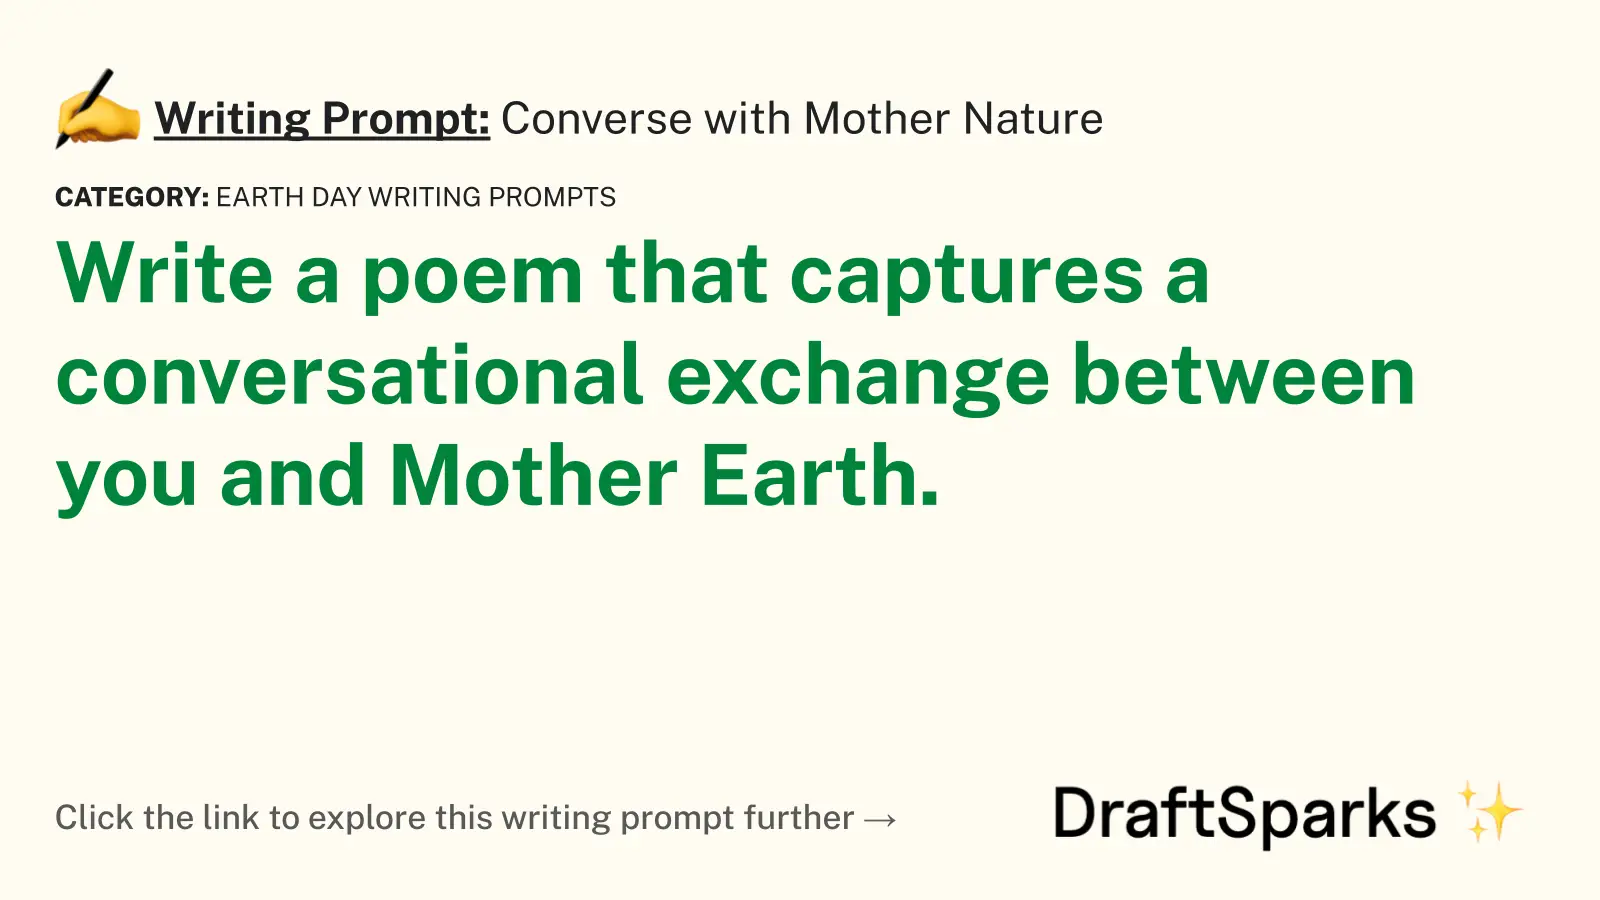 Converse with Mother Nature